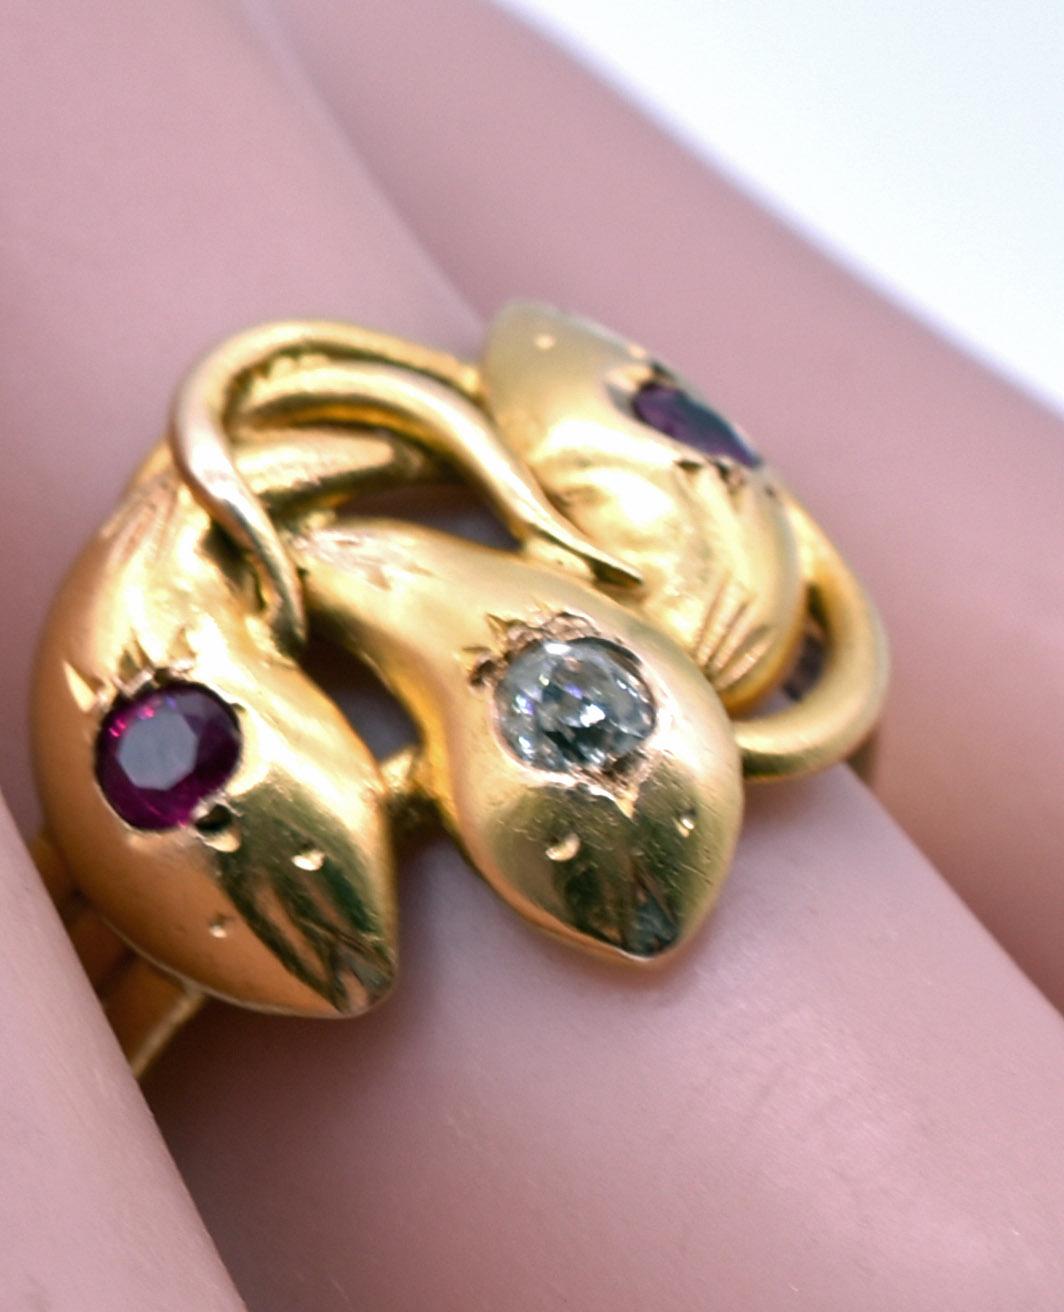 18K Snake Ring with a ruby on the two snake of the snake heads and a diamond on the center. The gold band is actually divided into 3 bands set together that wind around the ring.  Everything about this snake ring is wonderful, from it’s symmetrical